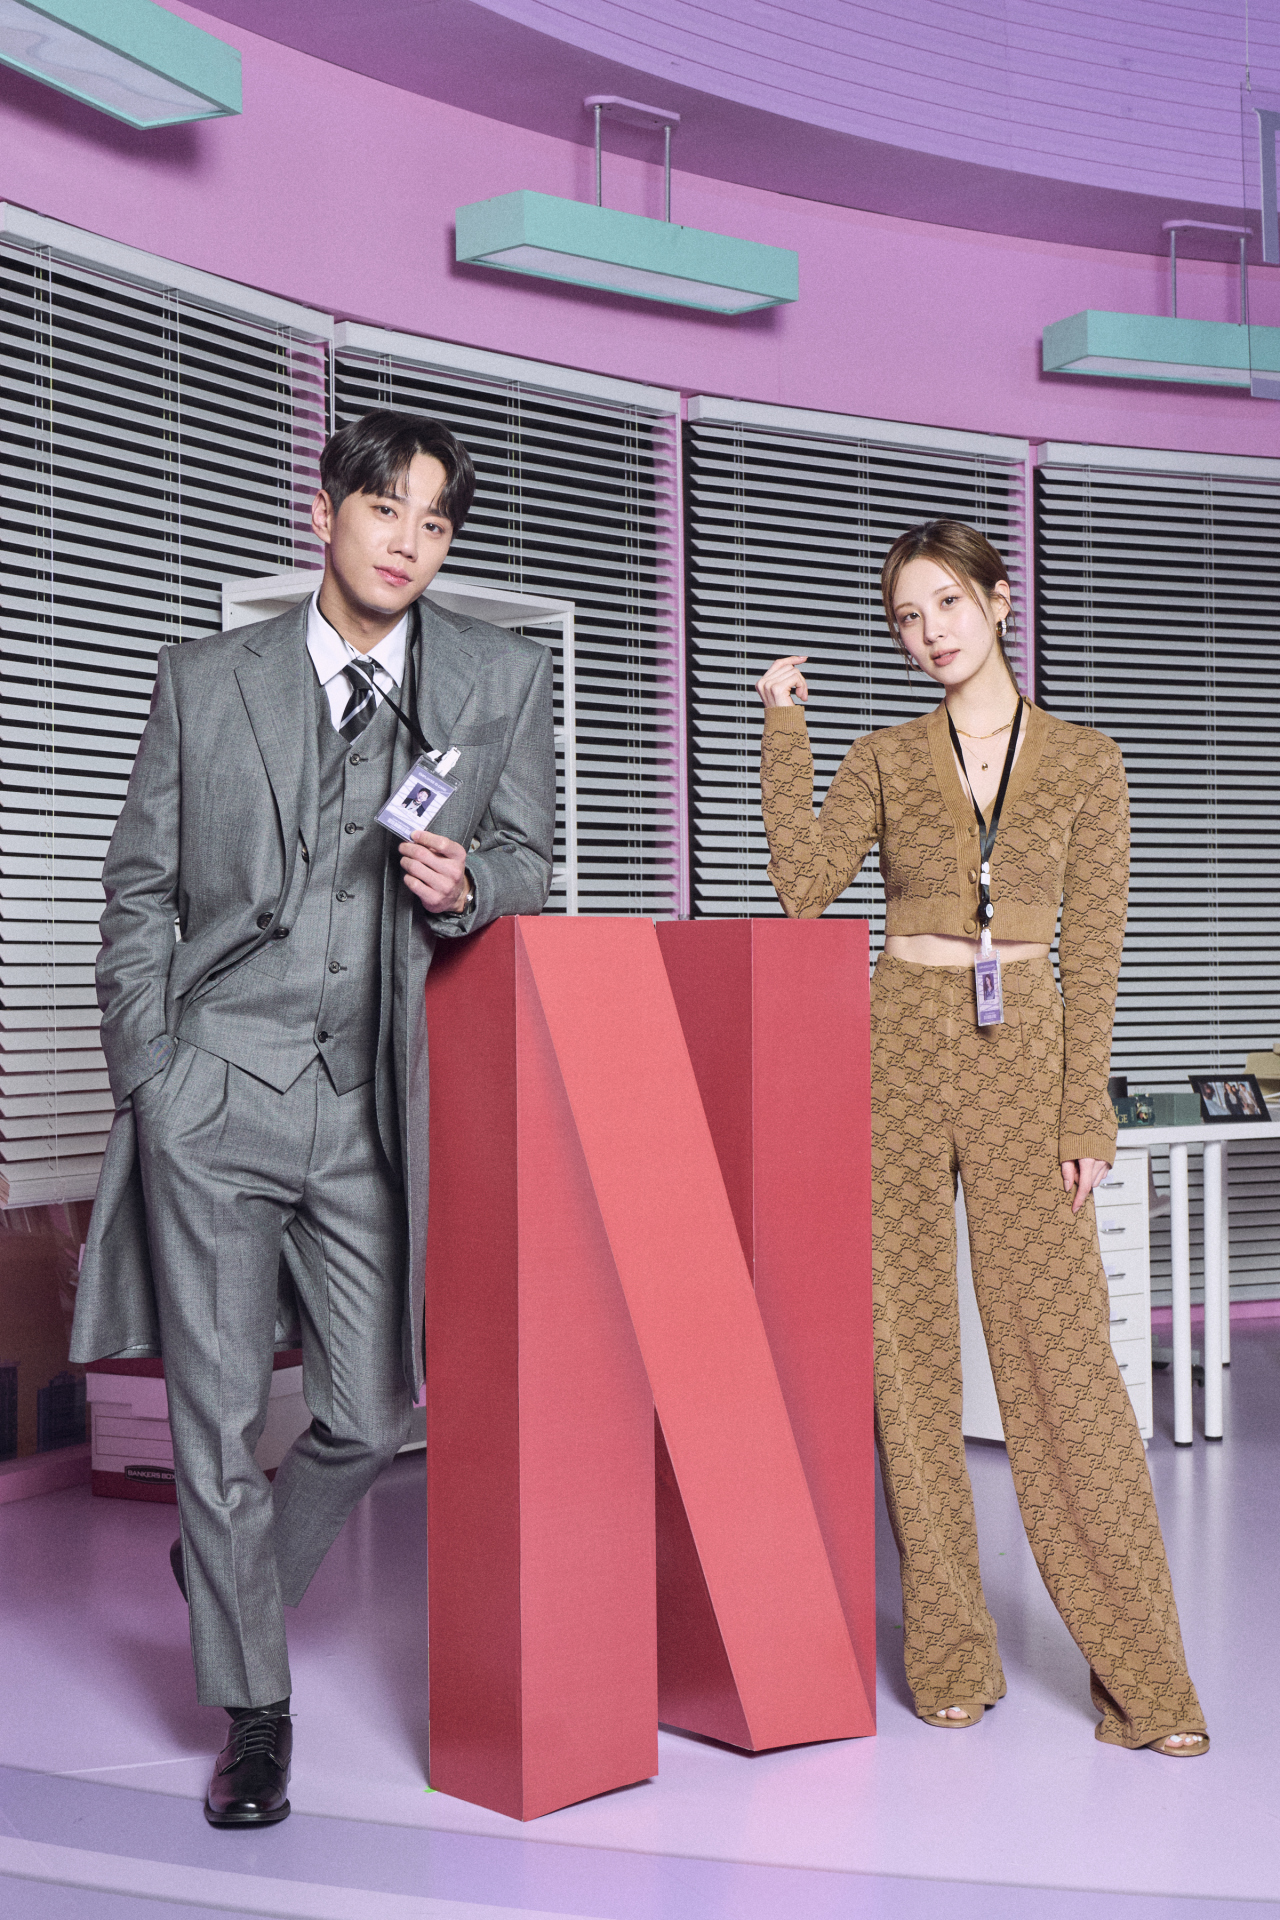 Actors of “Love and Leashes” Seohyun (right) and Lee Jun-young pose after an online press conference held on Tuesday. (Netflix)